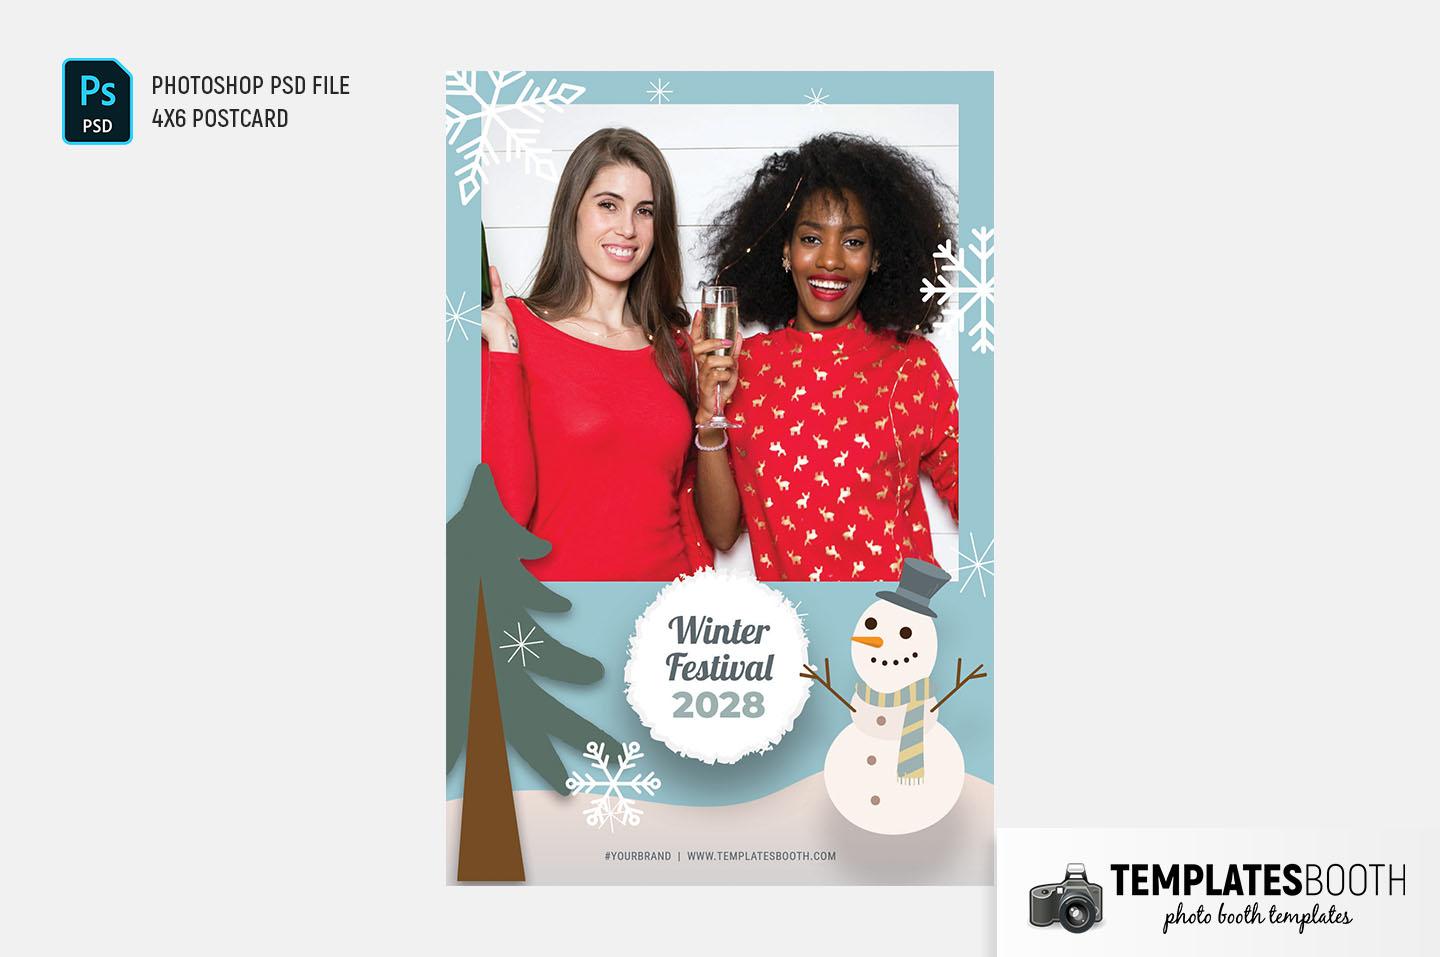 Winter Festival Photo Booth Template (4x6 postcard)